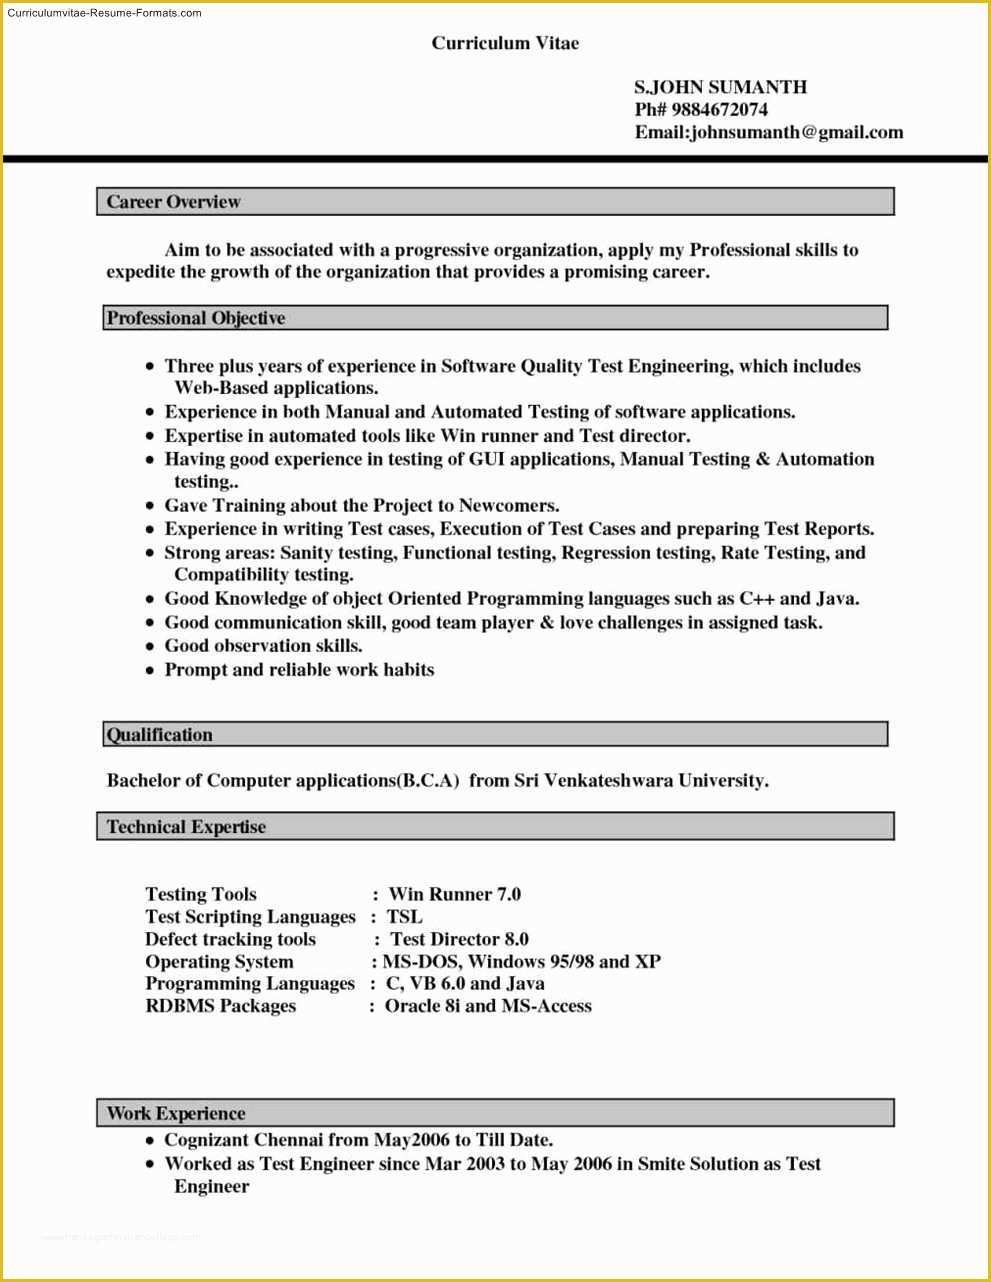 Free Microsoft Resume Templates for Word Of Free Resume Templates for Microsoft Word 2007 Free